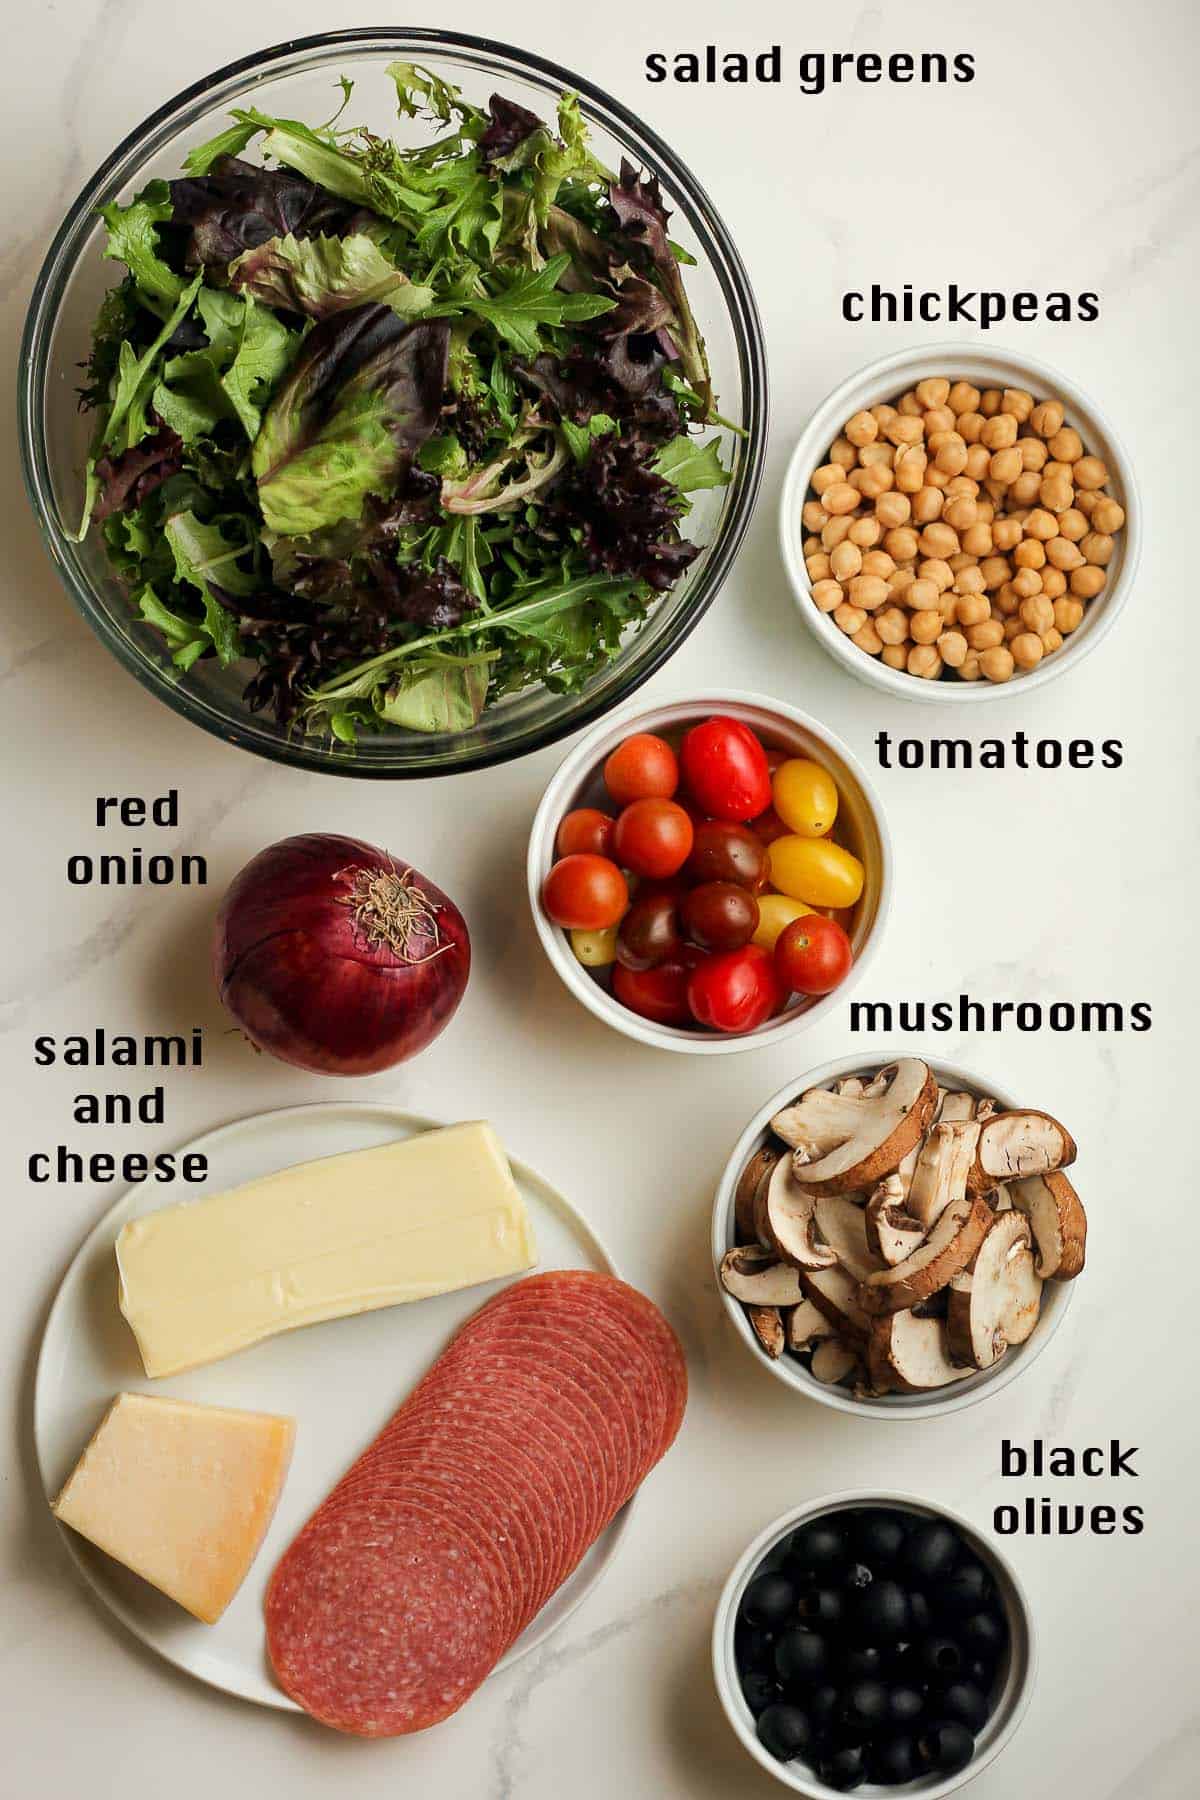 The ingredients for Italian salad.